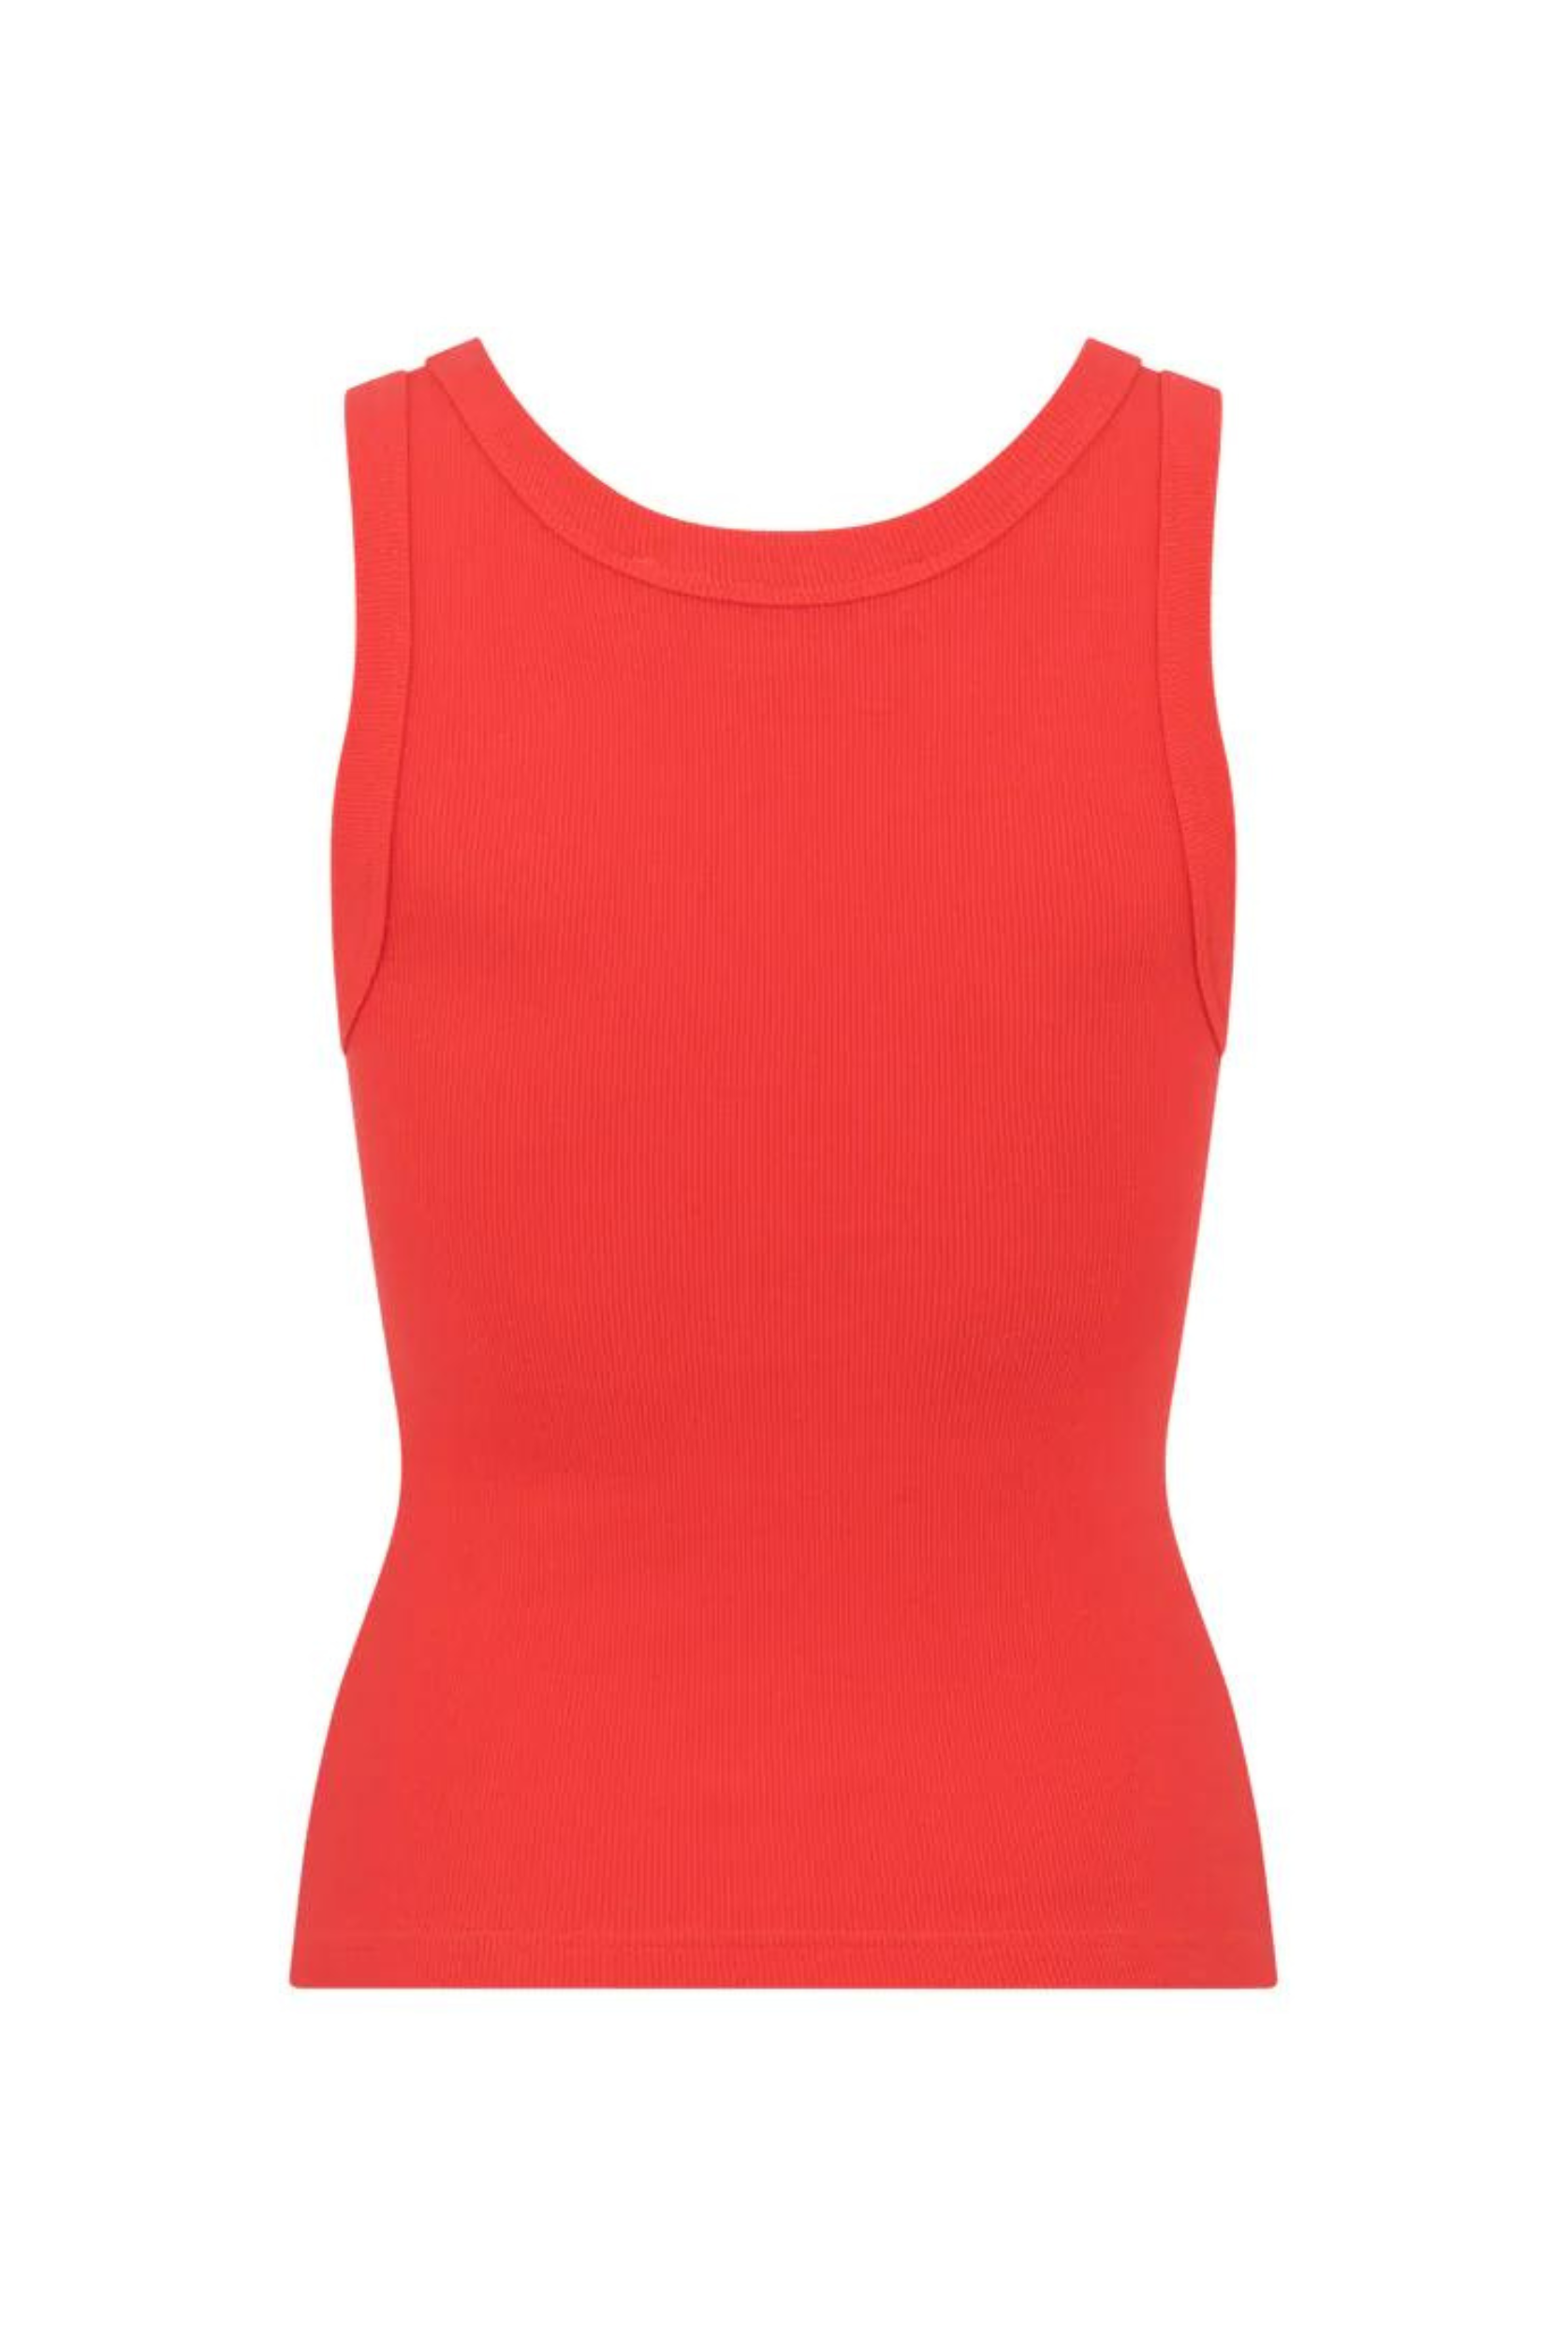 Araminta James Classic Tank in Coral with embroidery 